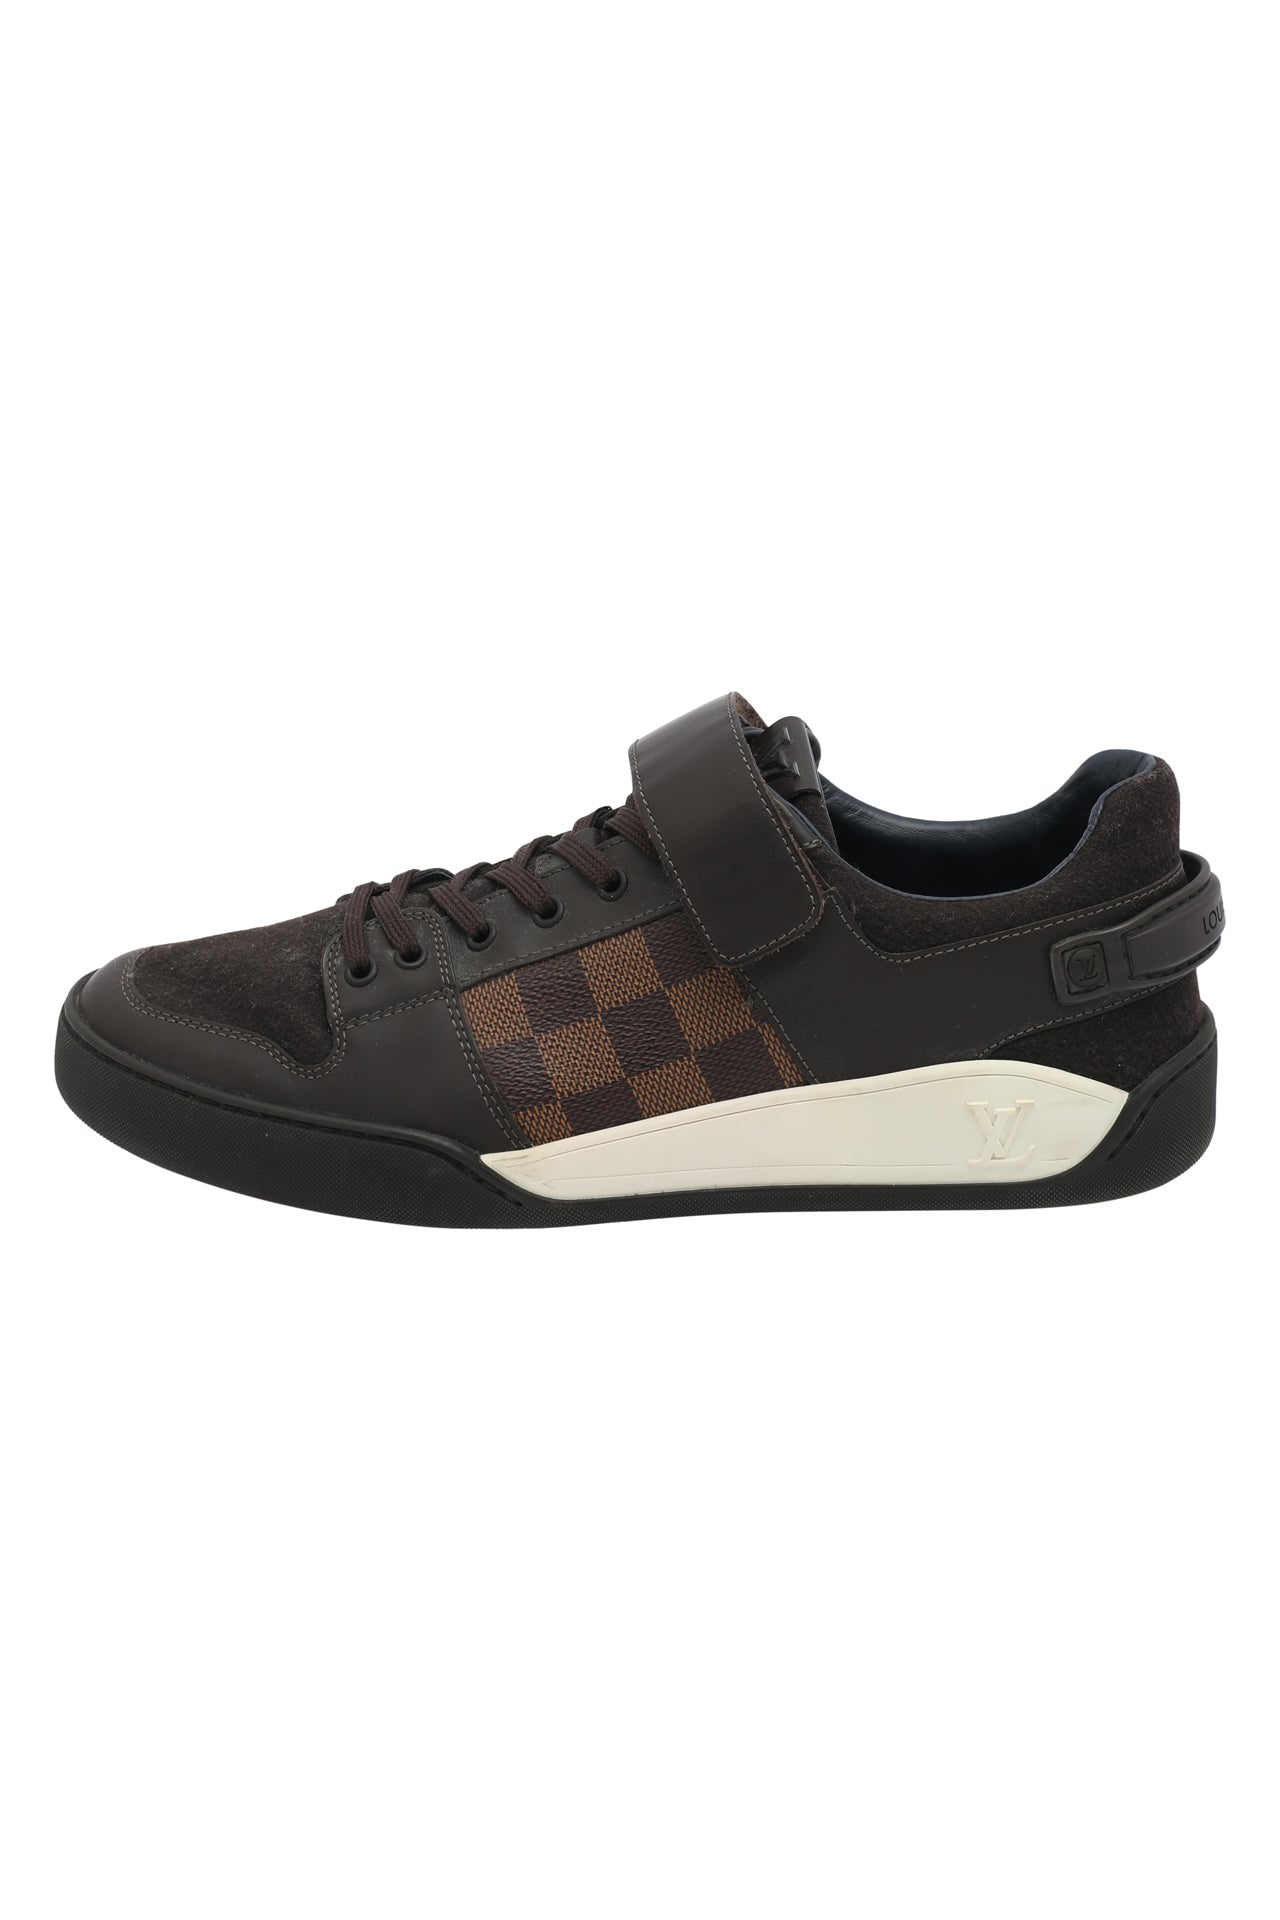 Louis Vuitton Damier Ebene Canvas And Brown Leather Lace Up High Top  Sneakers Size 40 Louis Vuitton